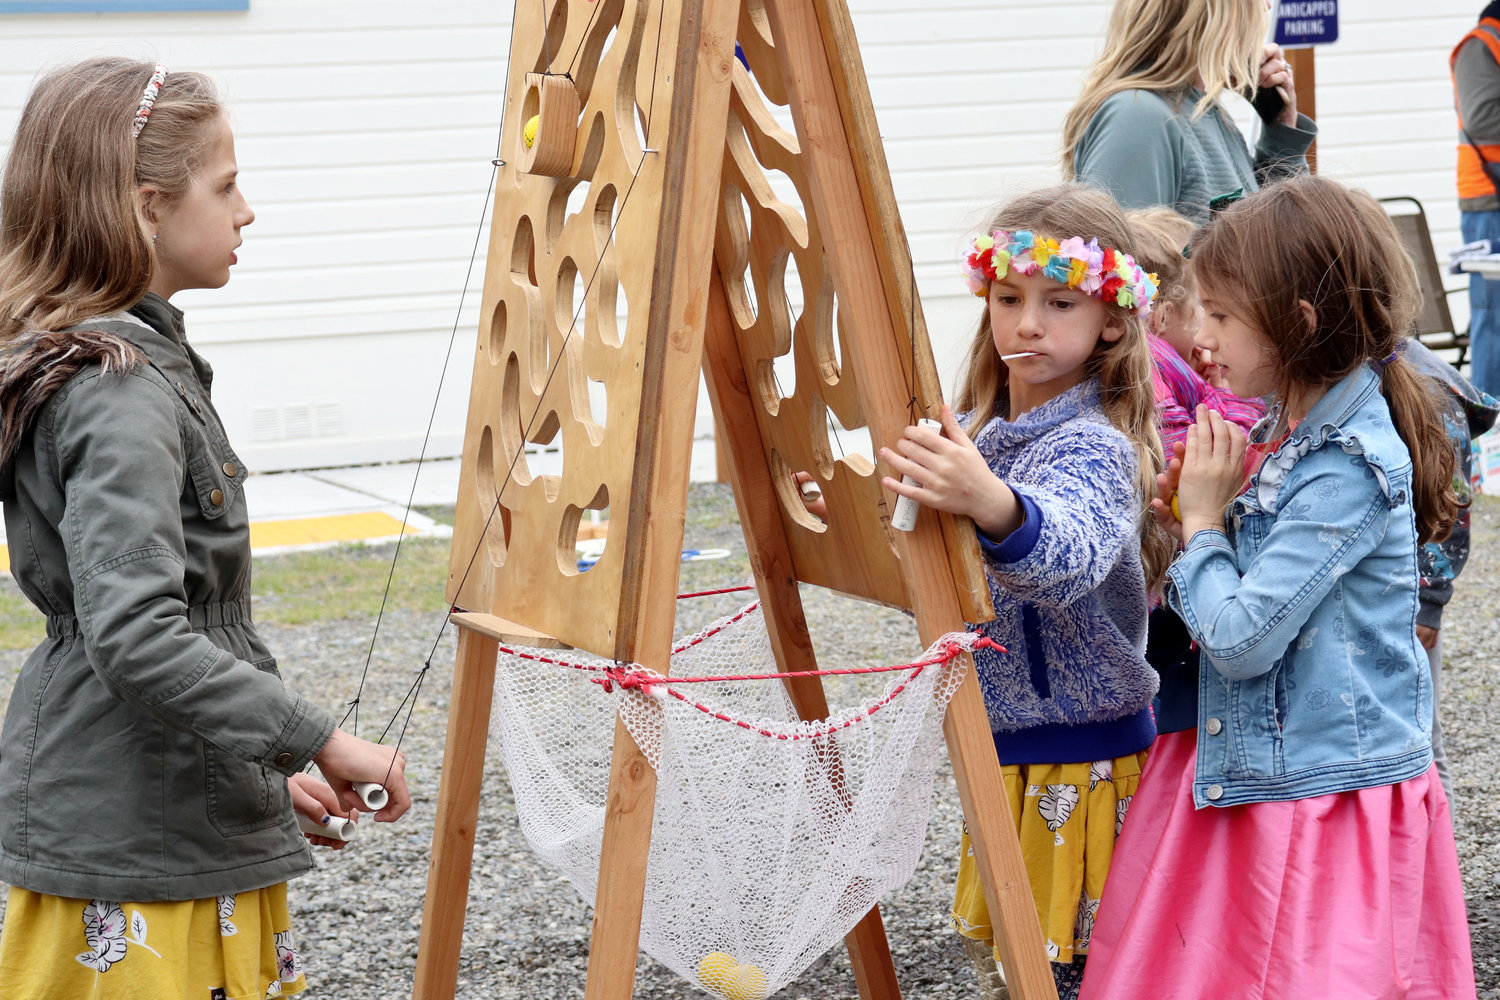 From left, Junia, Linnea and Abigail attempt a ball puzzle set up outside of Swede Hall during the Swede Day celebration in Rochester on Saturday.